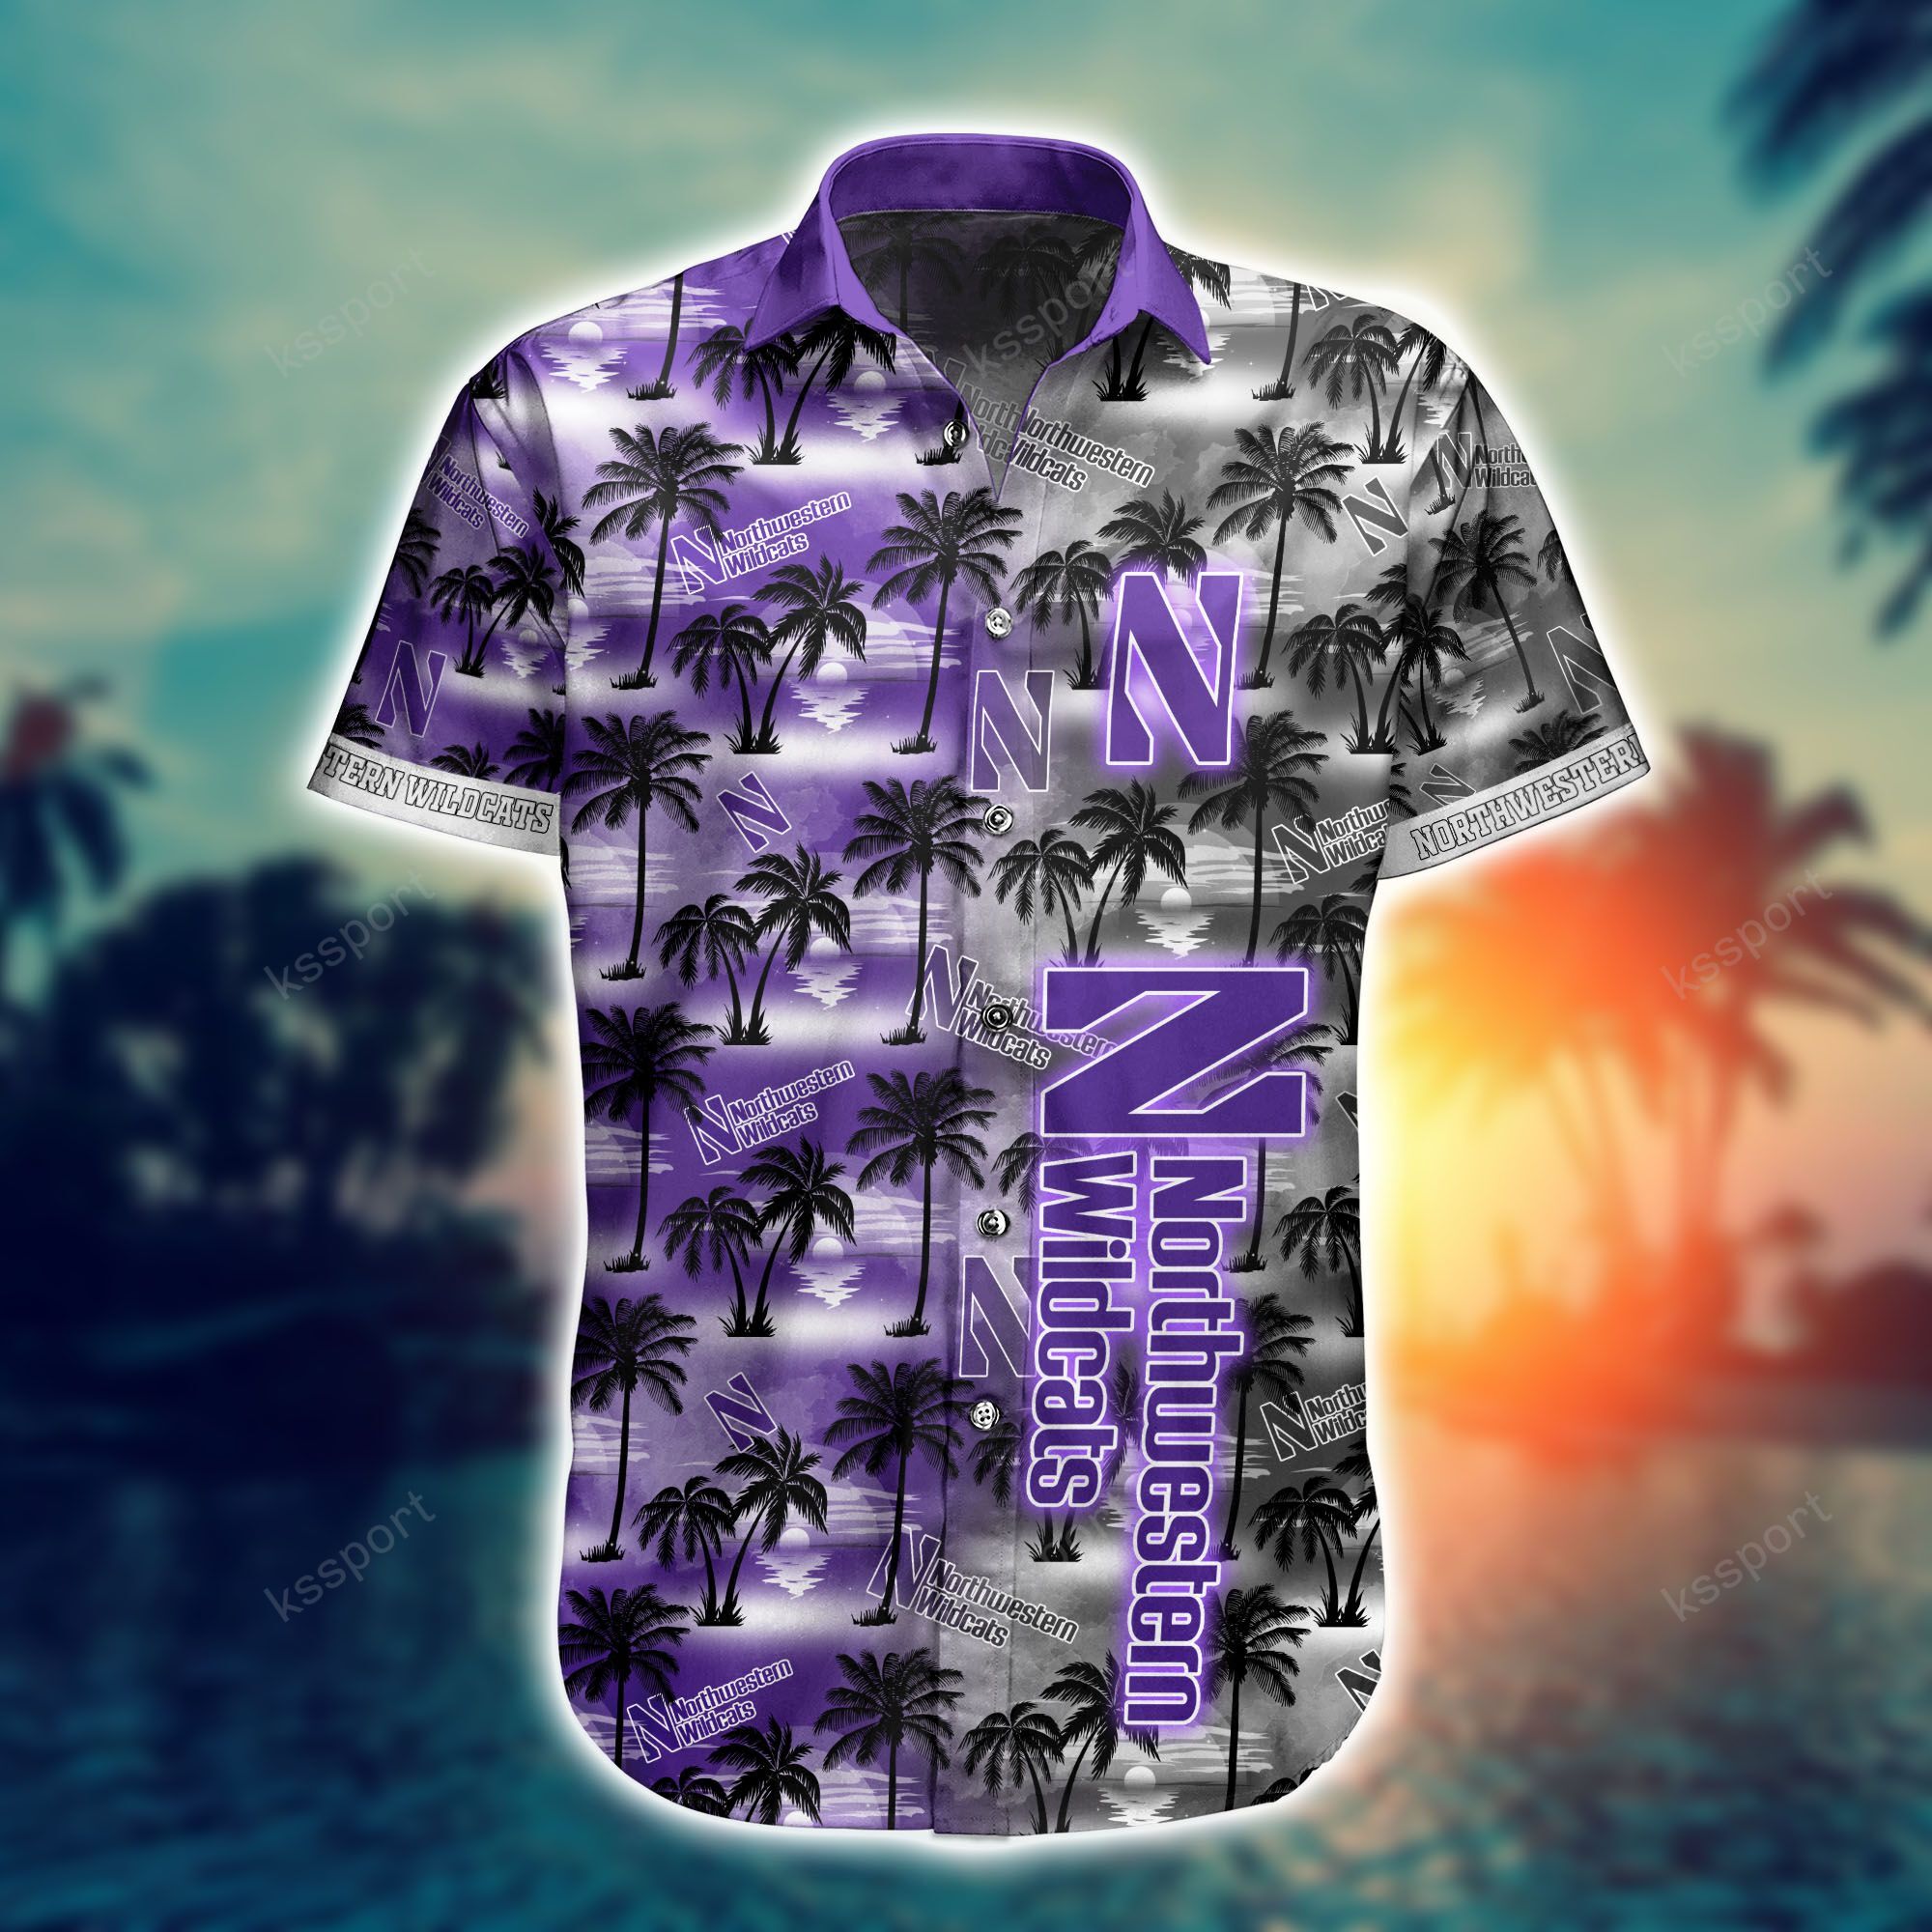 Top cool Hawaiian shirt 2022 - Make sure you get yours today before they run out! 158